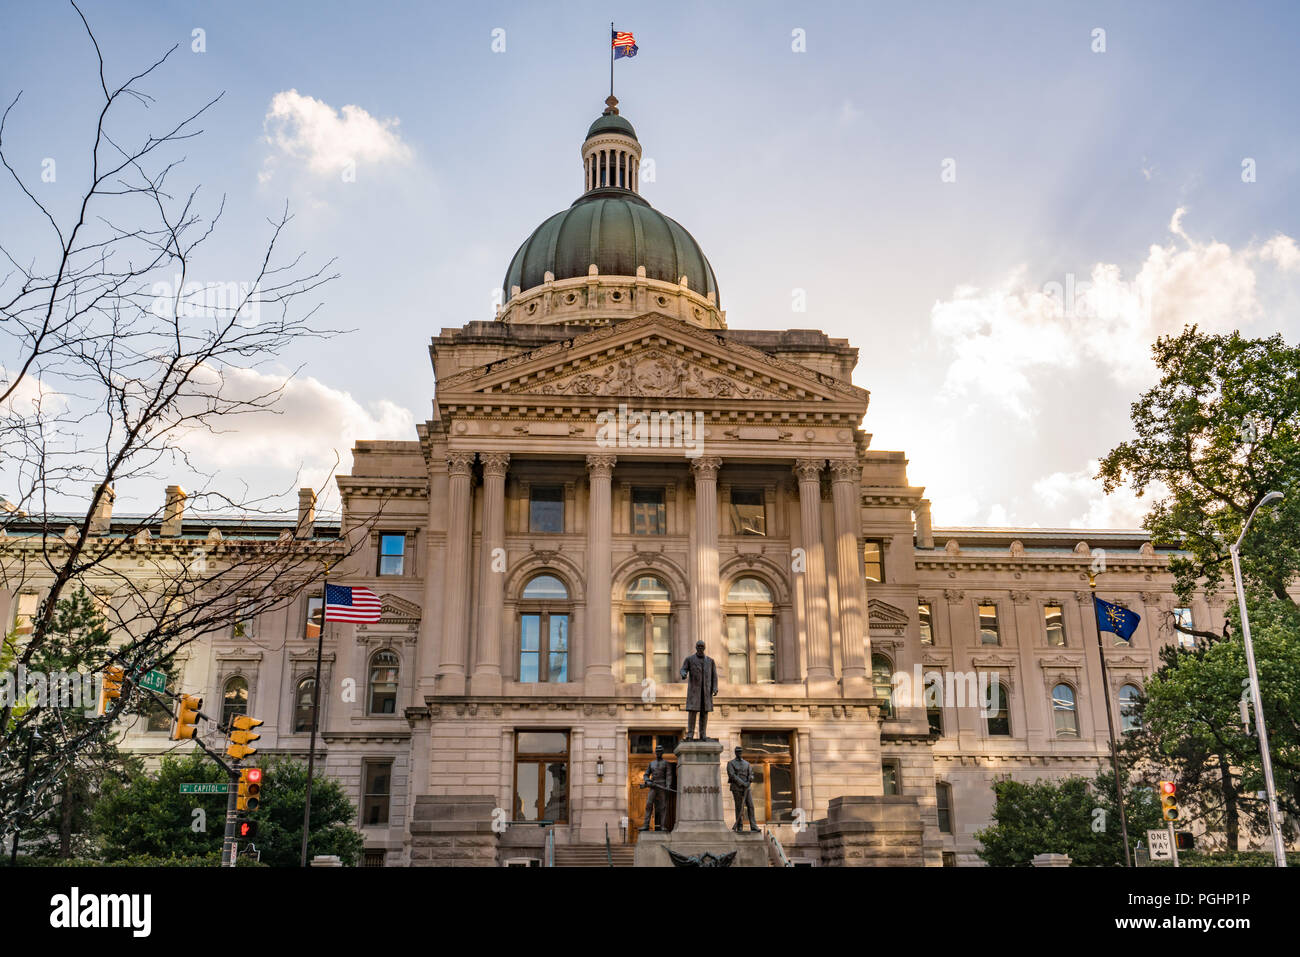 INDIANAPOLIS, 18. JUNI 2018: Indiana State Capital Building in Downtown Indianapolis, Indiana Stockfoto